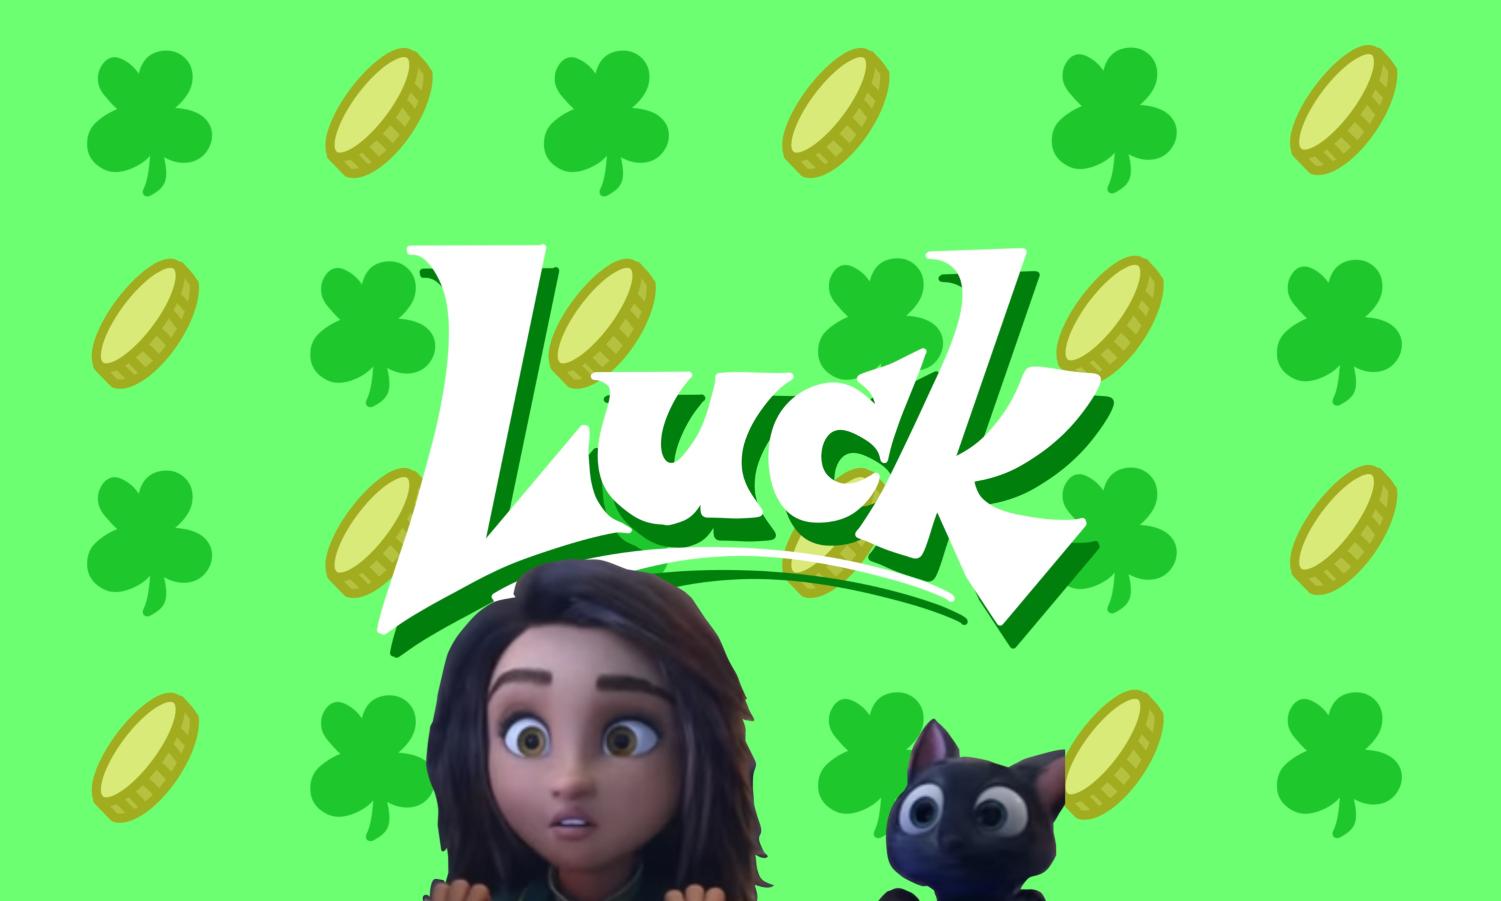 A+girl+with+brown+hair+and+a+black+cat+stare+forward+against+a+green+backdrop+with+four-leaf+clovers%2C+golden+coins+and+the+word+%E2%80%9CLuck%E2%80%9D+painted+in+white+letters.